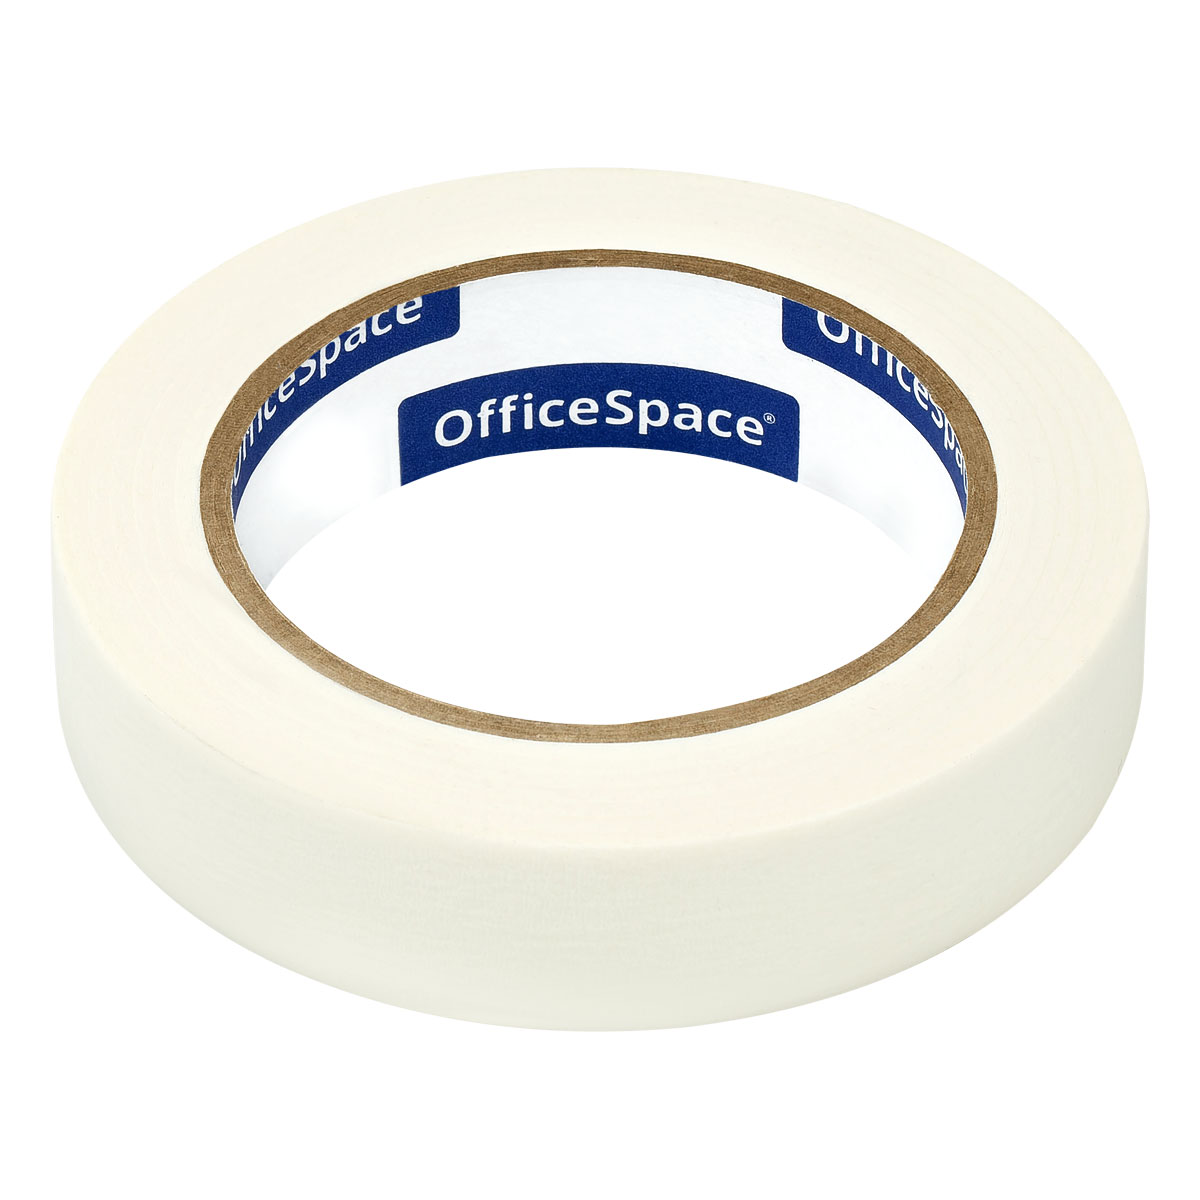    OfficeSpace, 25*50,  